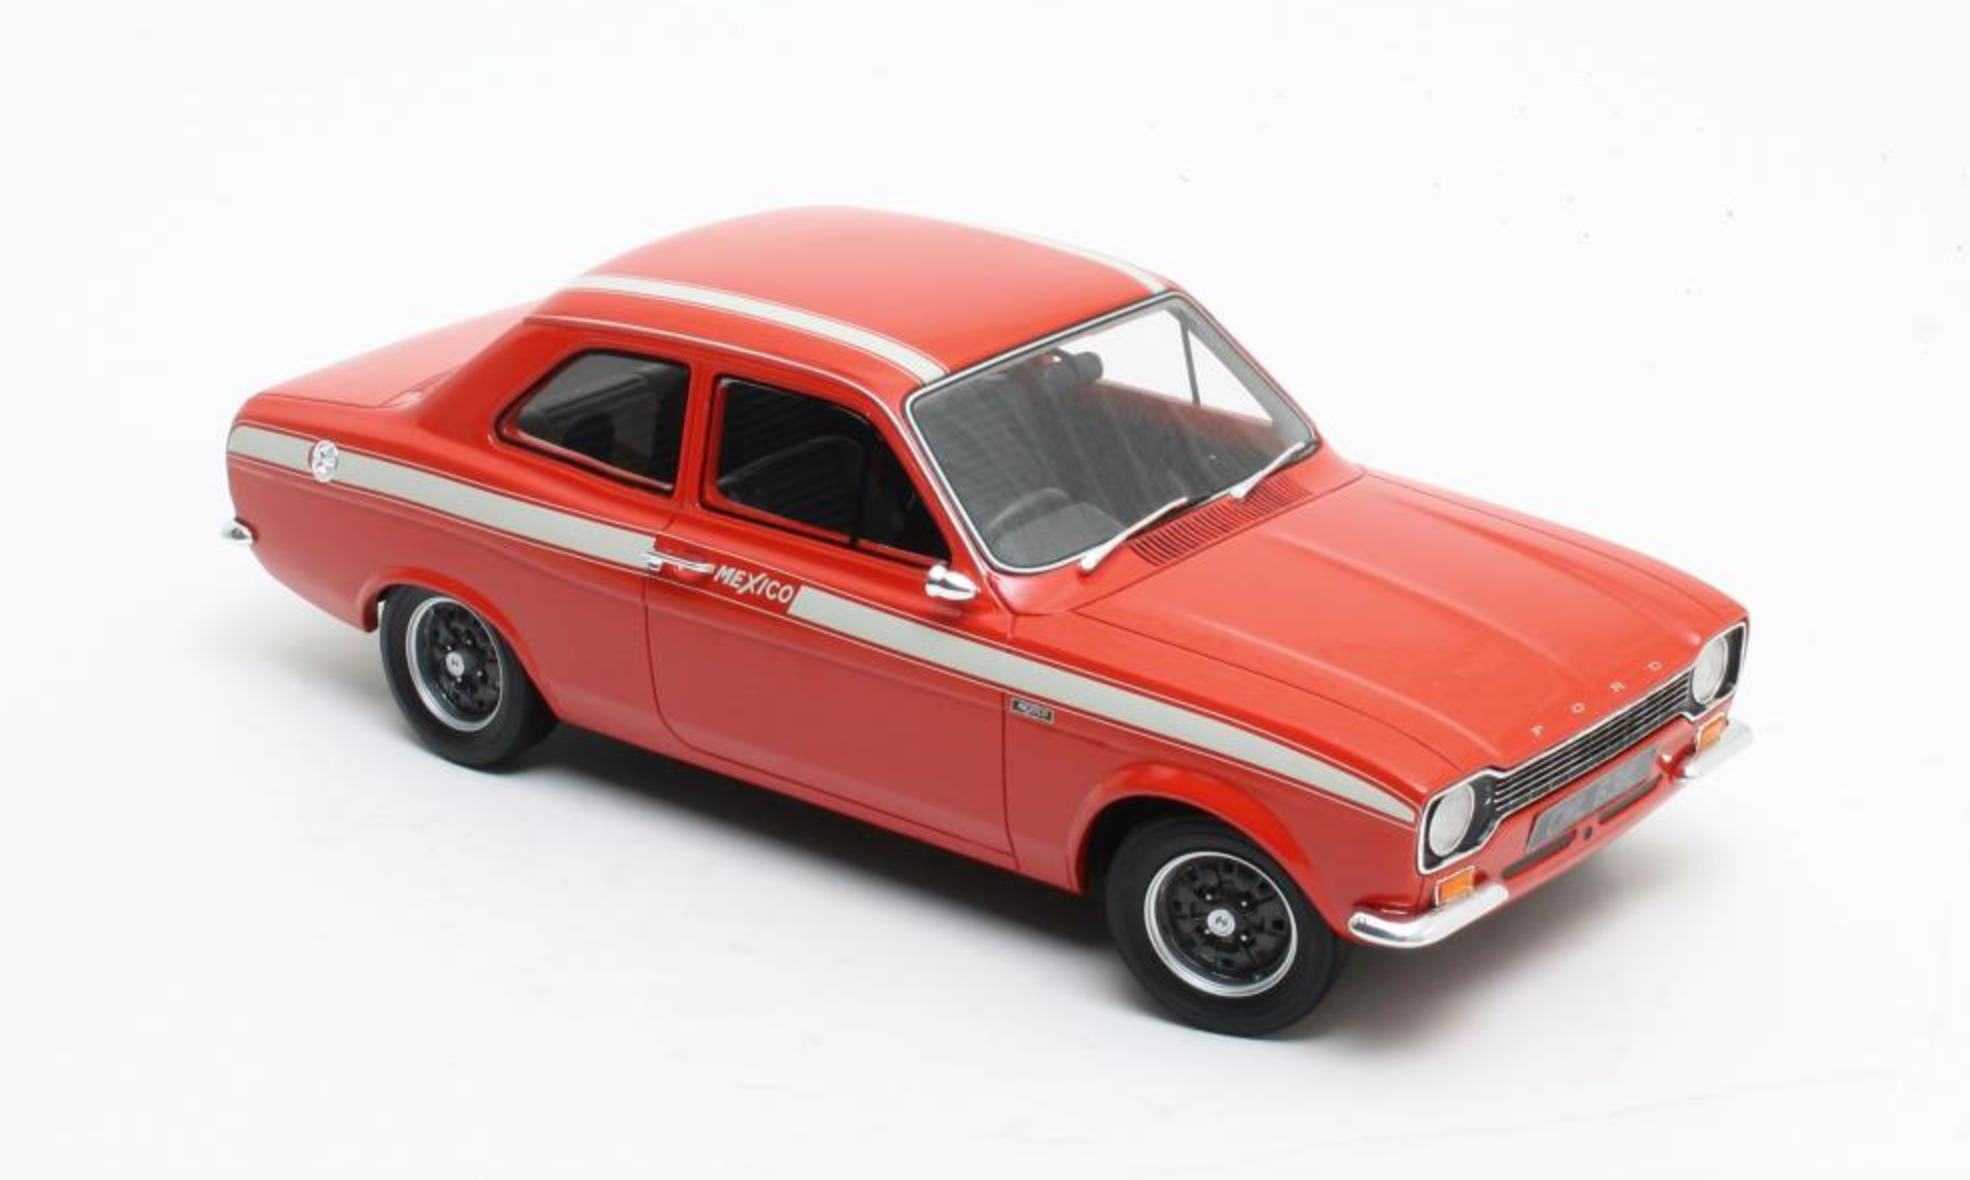 Details about   CULT MODELS 1/18 RESIN 1973 MK1 MKI FORD ESCORT MEXICO RED RHD/UK REG CML063-1 